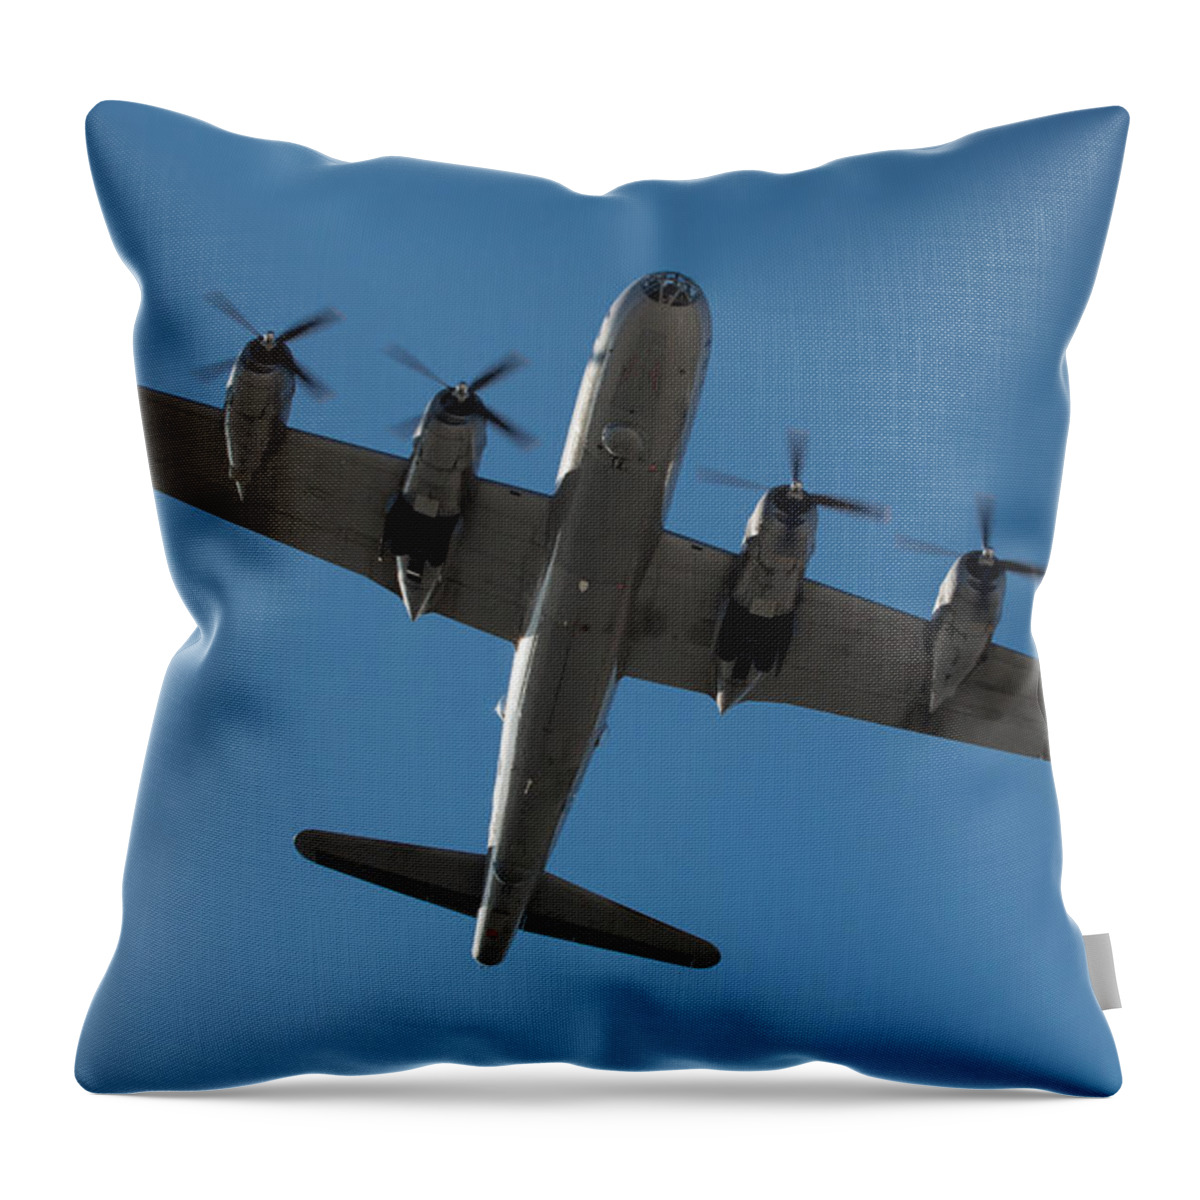 Fifi Throw Pillow featuring the photograph Fifi Overhead by John Daly